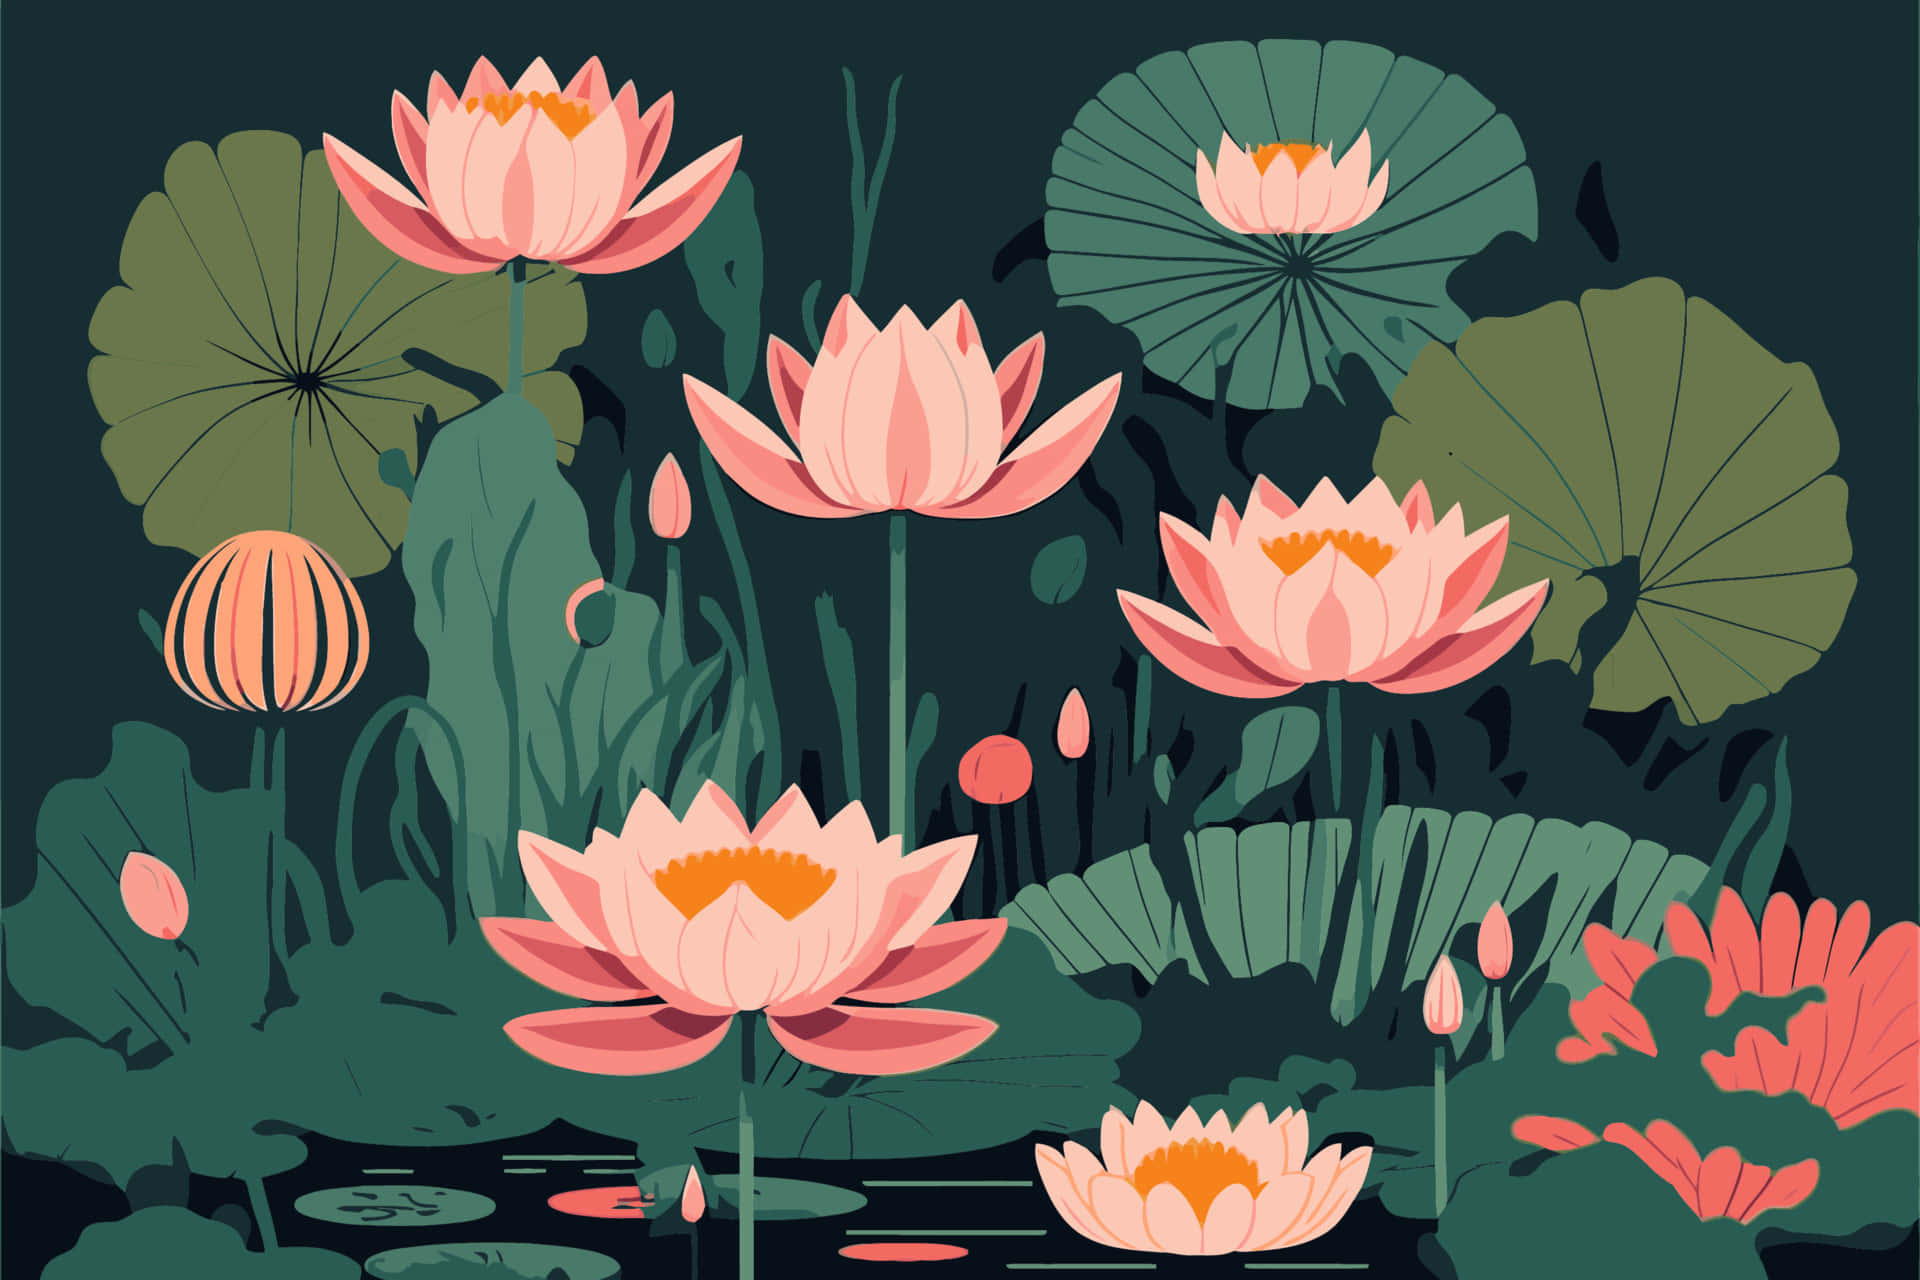 Blooming Lotus, Glowing In the Warm Sunlight